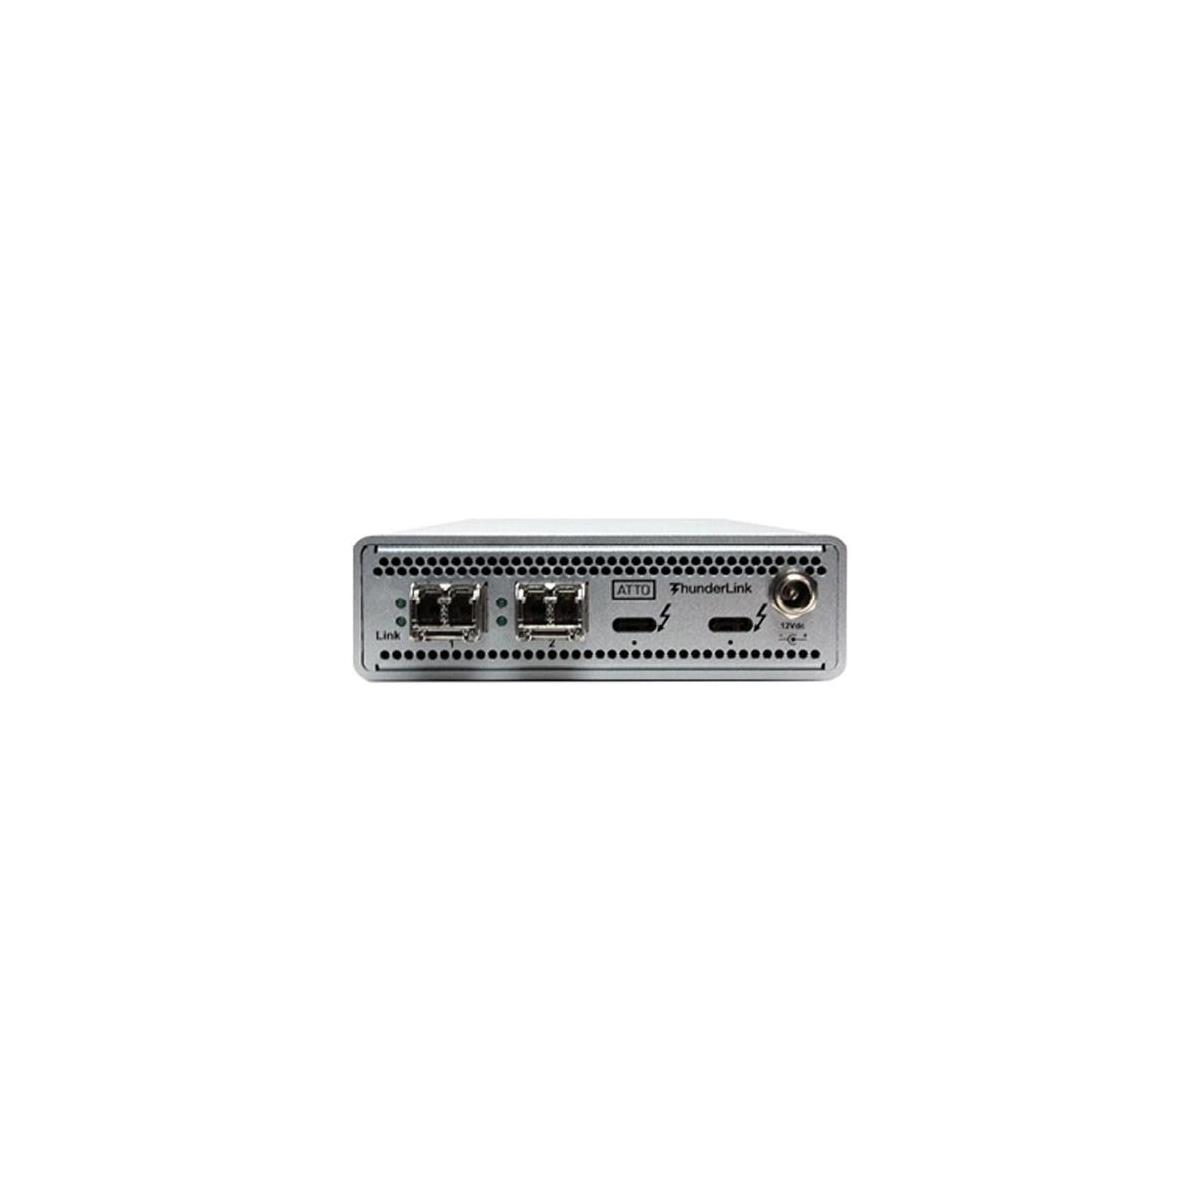 Photos - Other network equipment ATTO Technology ThunderLink NS 3102 40Gb/s Thunderbolt 3 to 10GbE  A(SFP+)